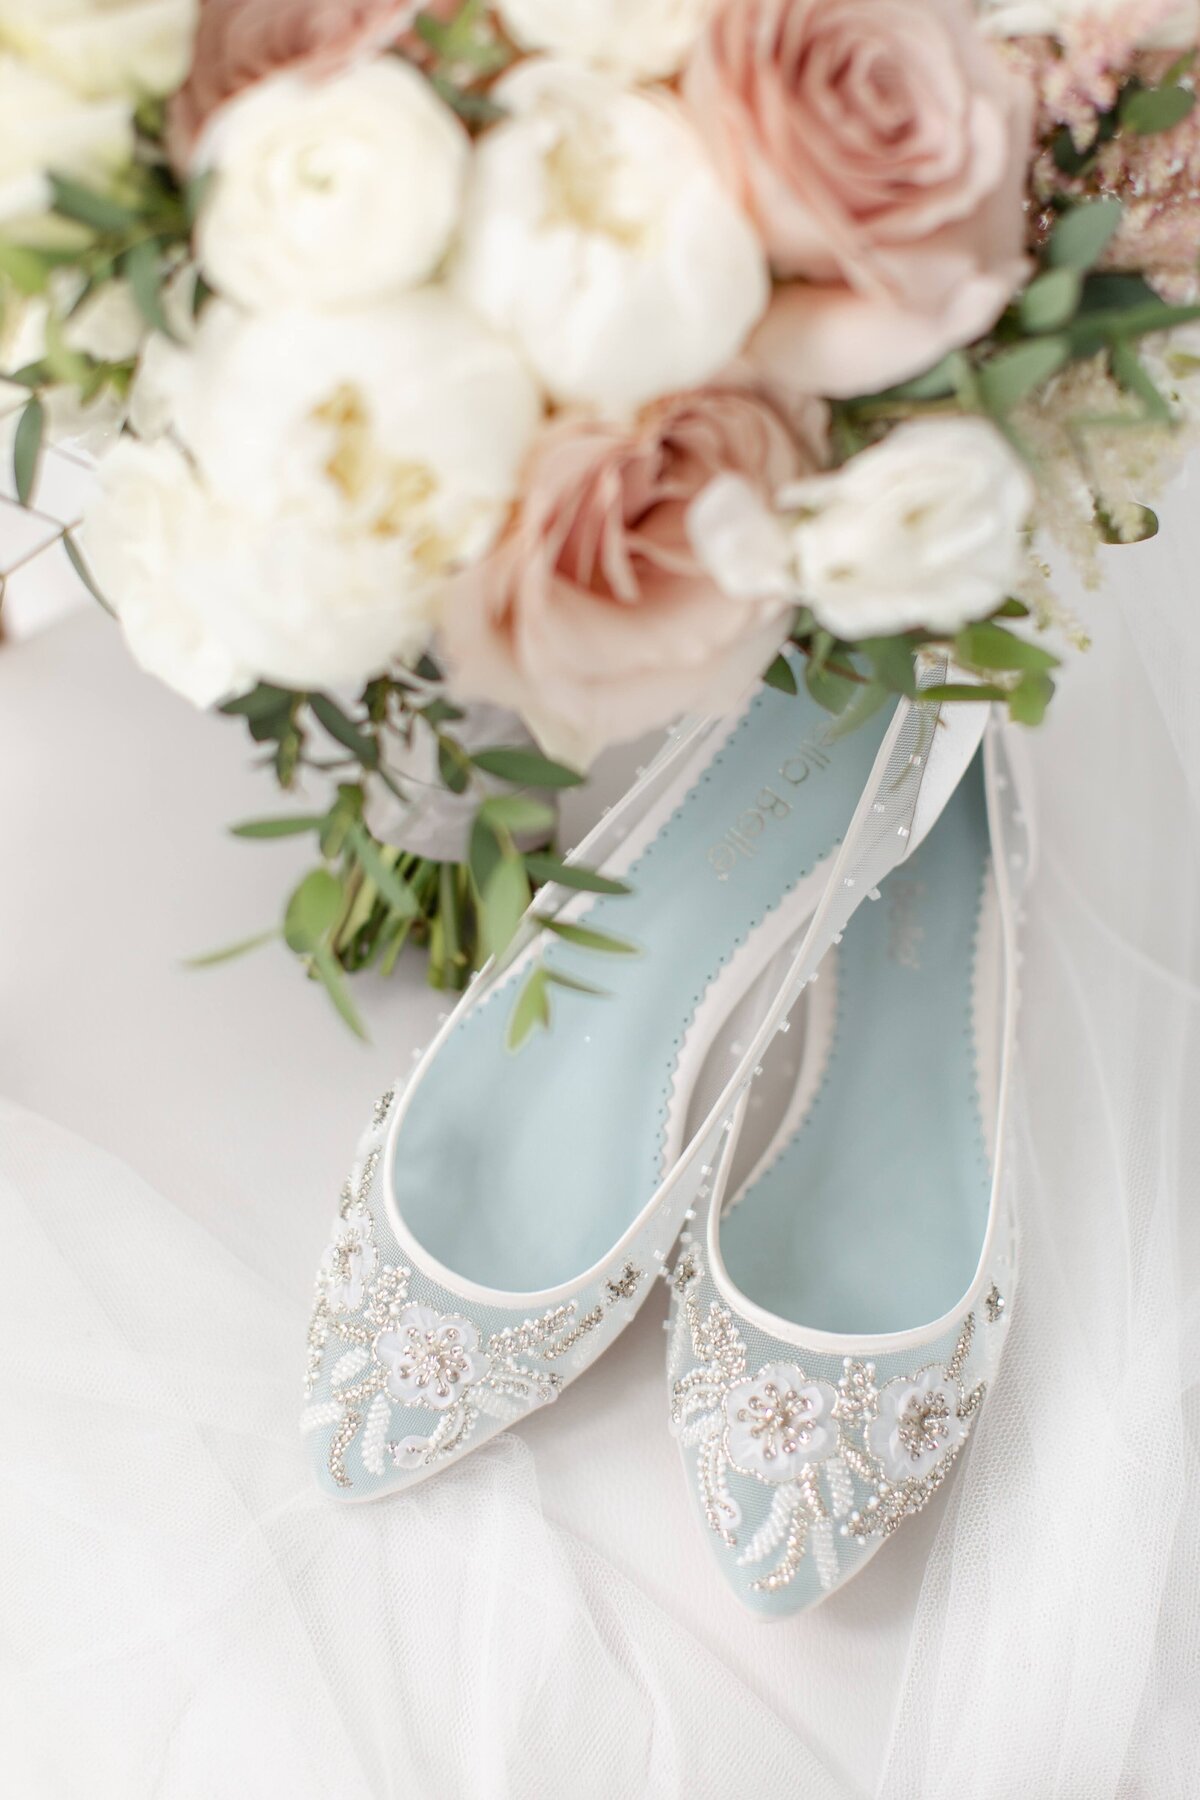 blush and white flowers with bridal shoes